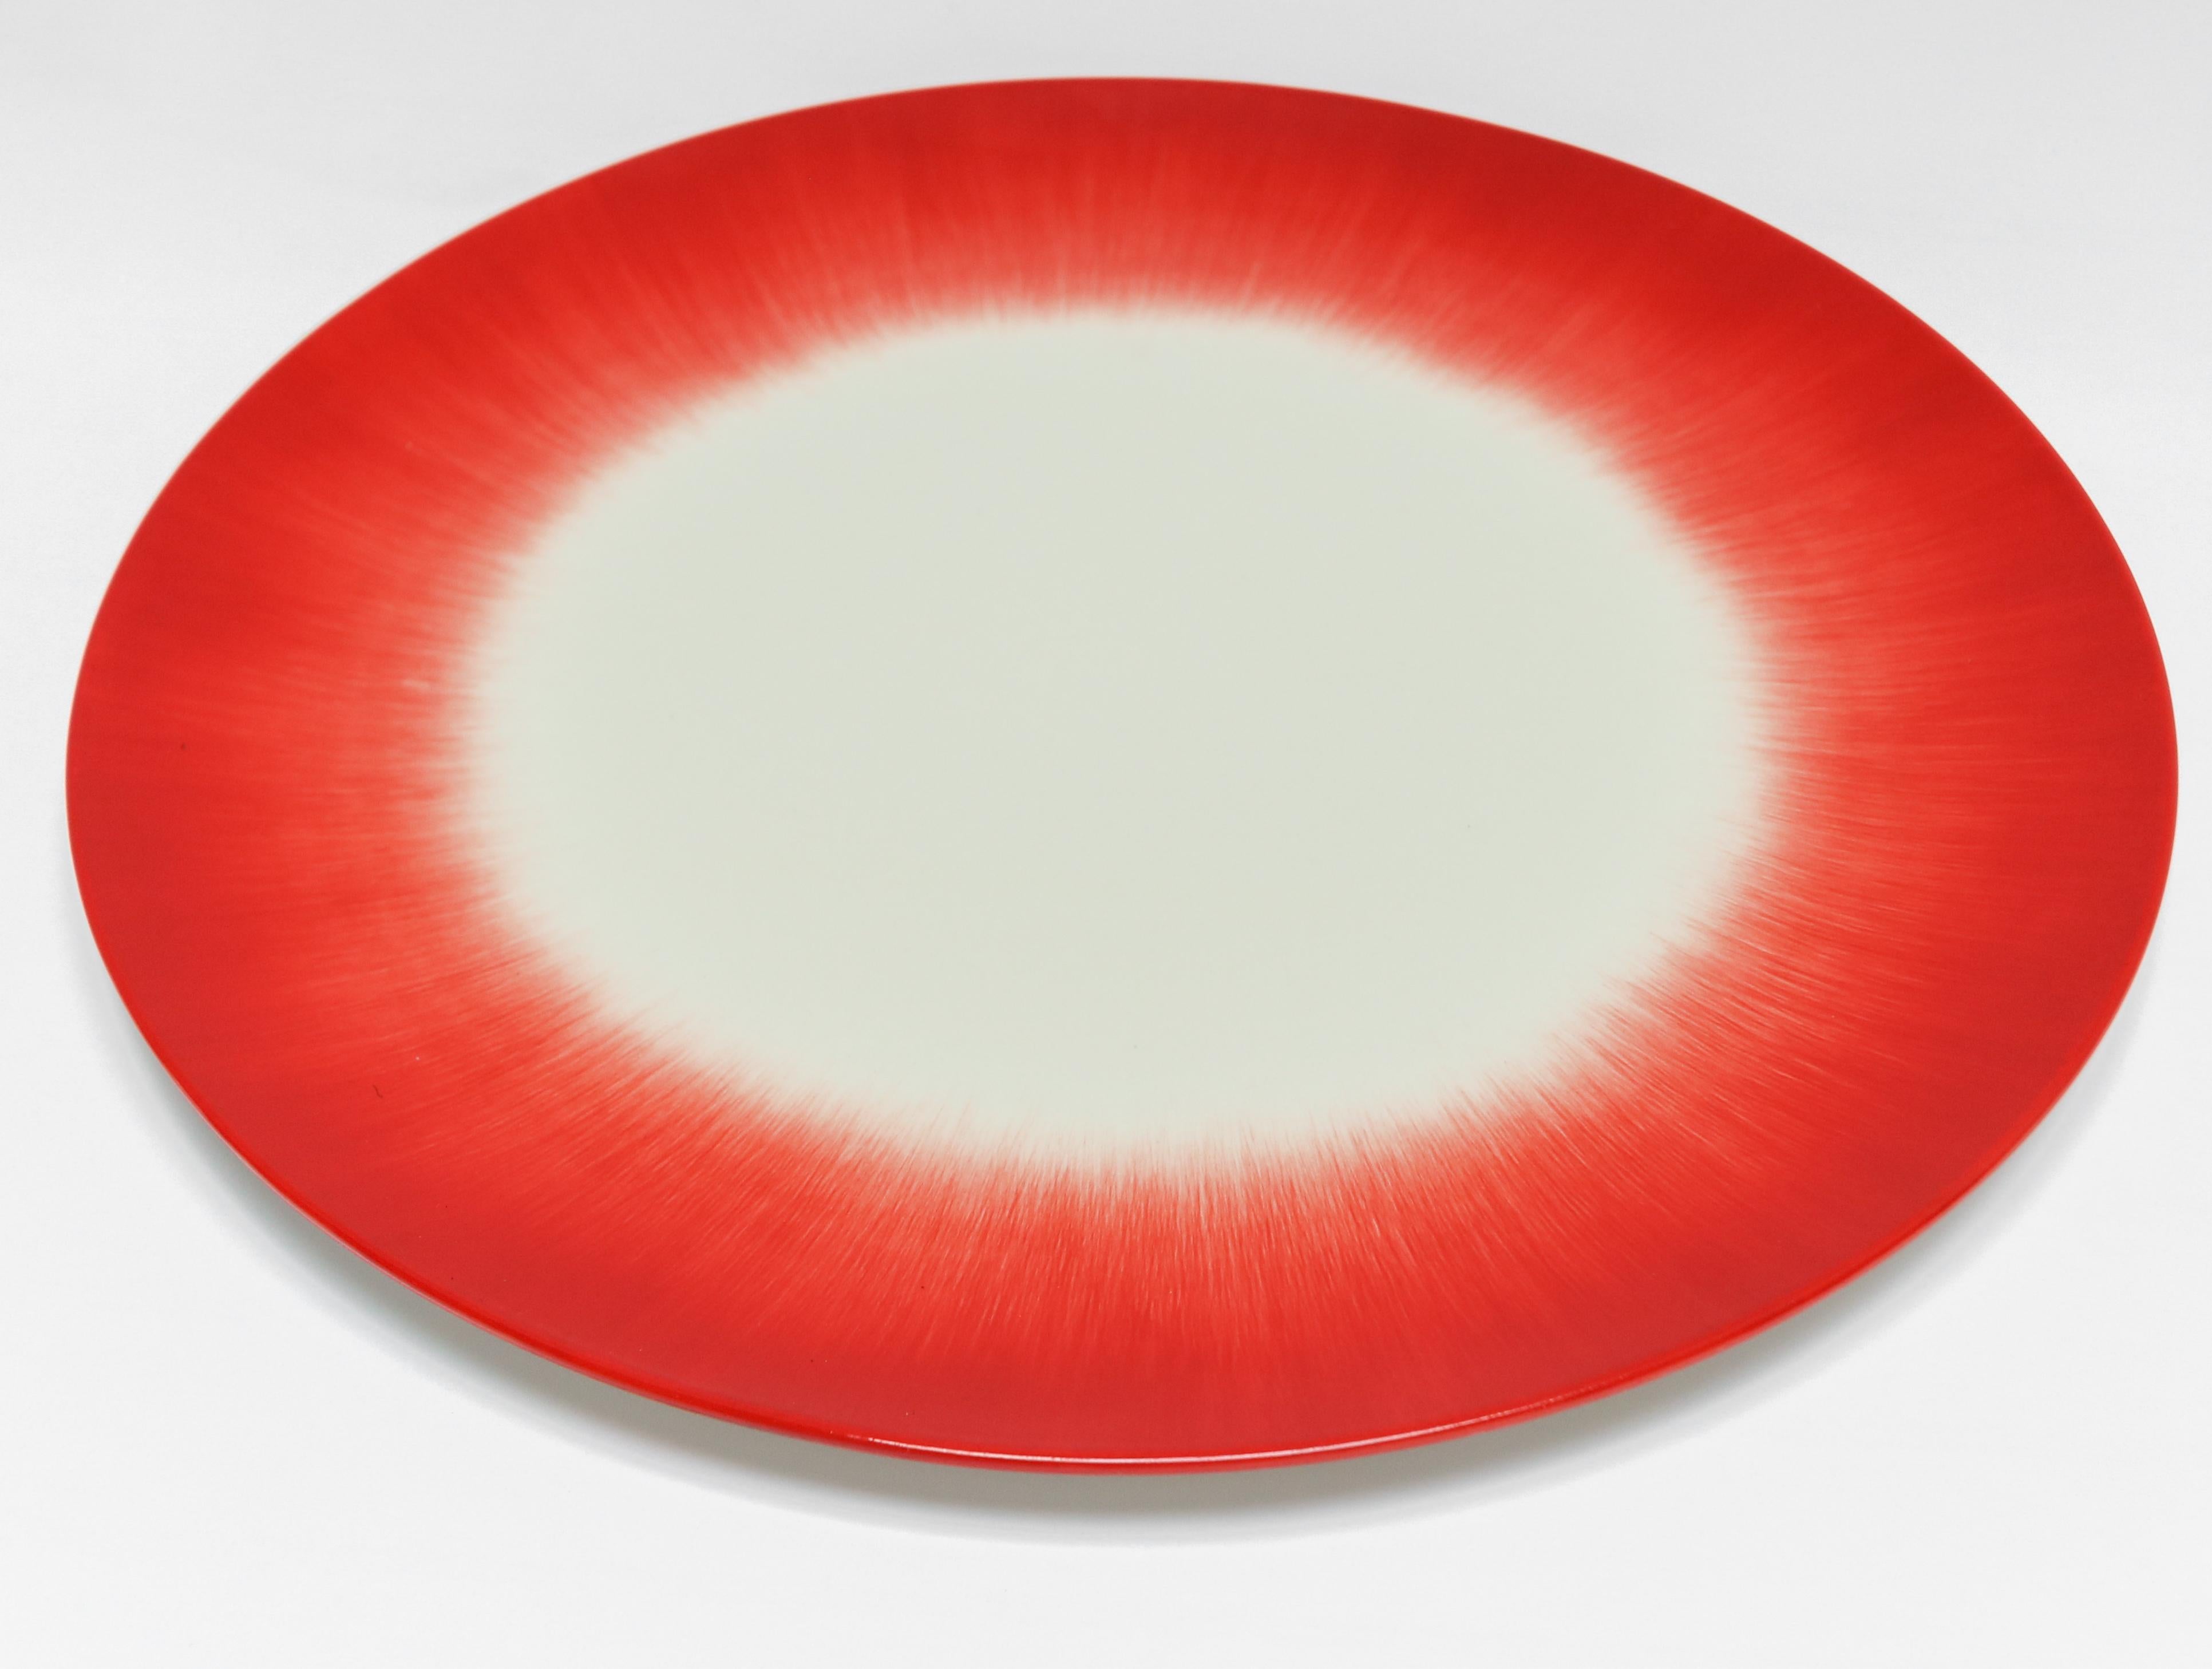 Ann Demeulemeester for Serax Dé dinner plate in off white / red. Hand painted with a starburst pattern. Measures: 24 cm diameter x 1.1 cm high. Must be purchased in quantities of two.